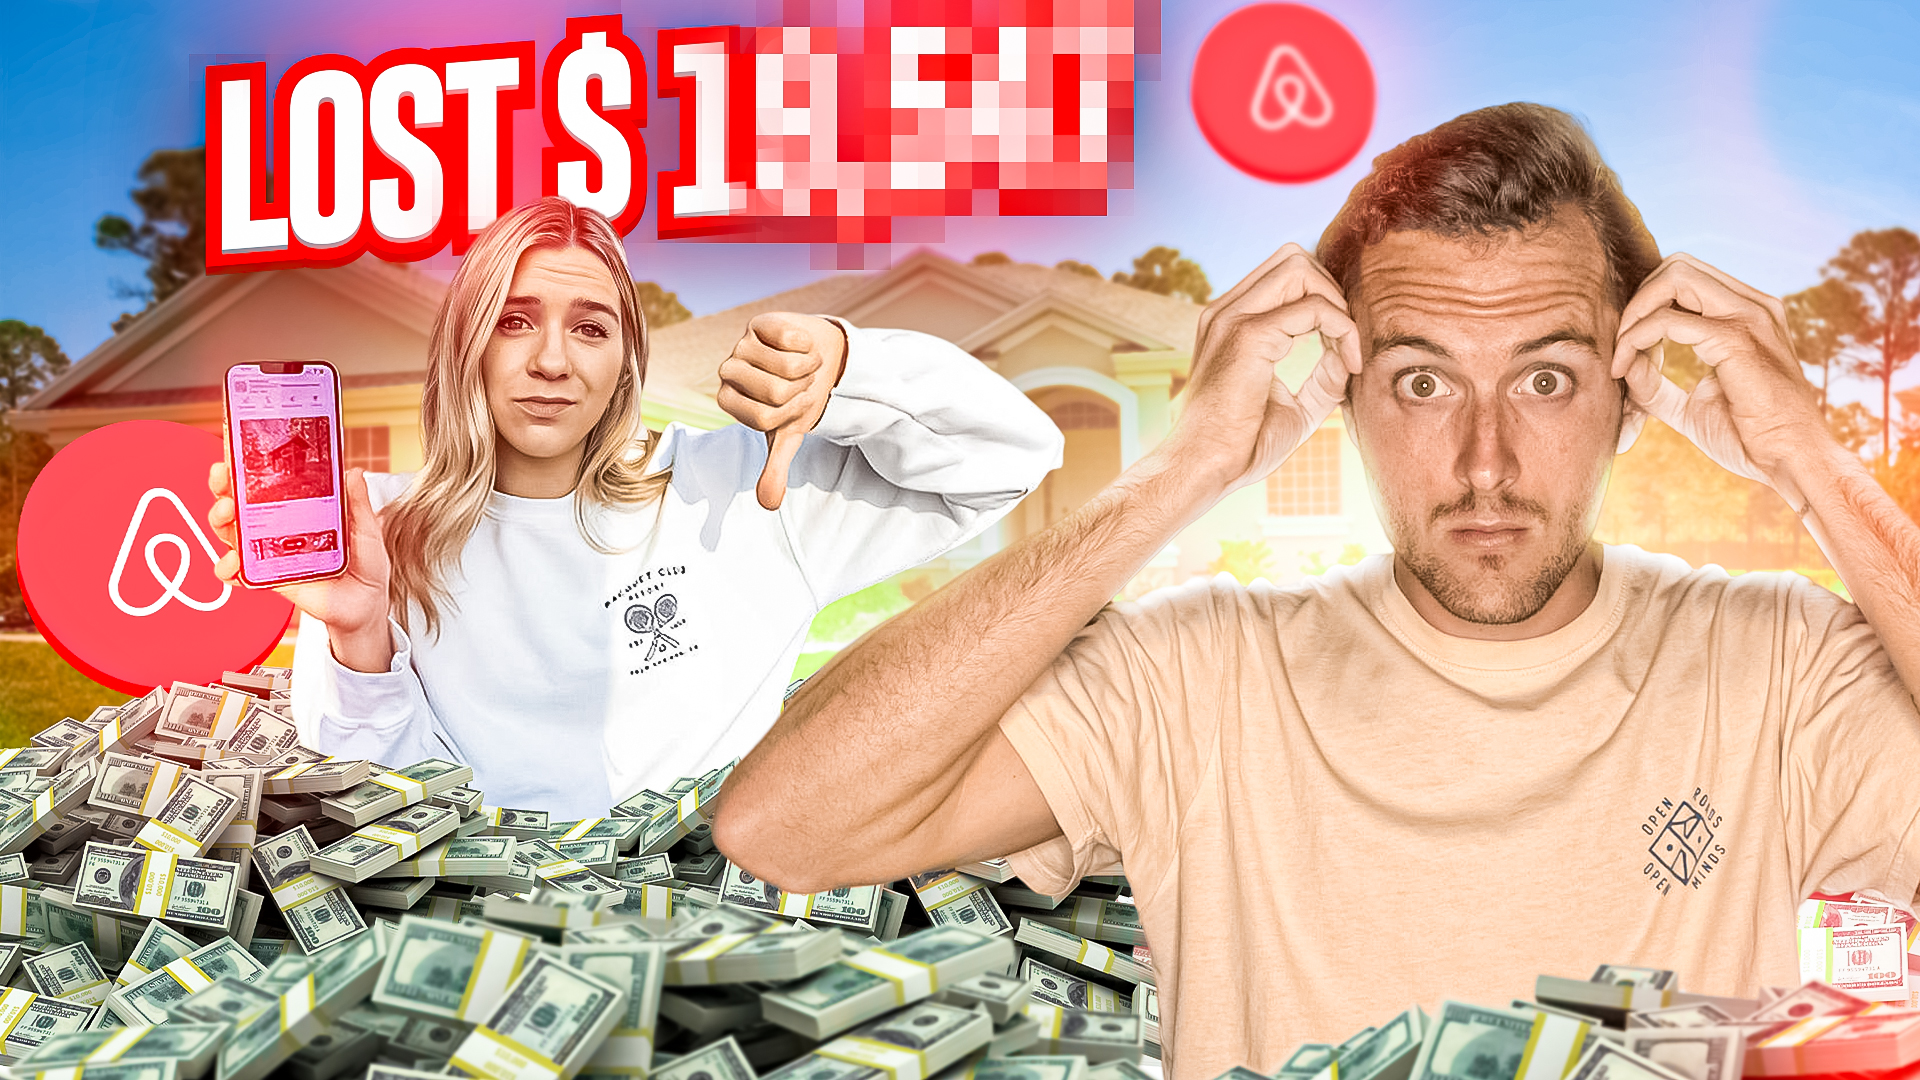 Shelby Church's Airbnb is Losing Money - My Honest Reaction